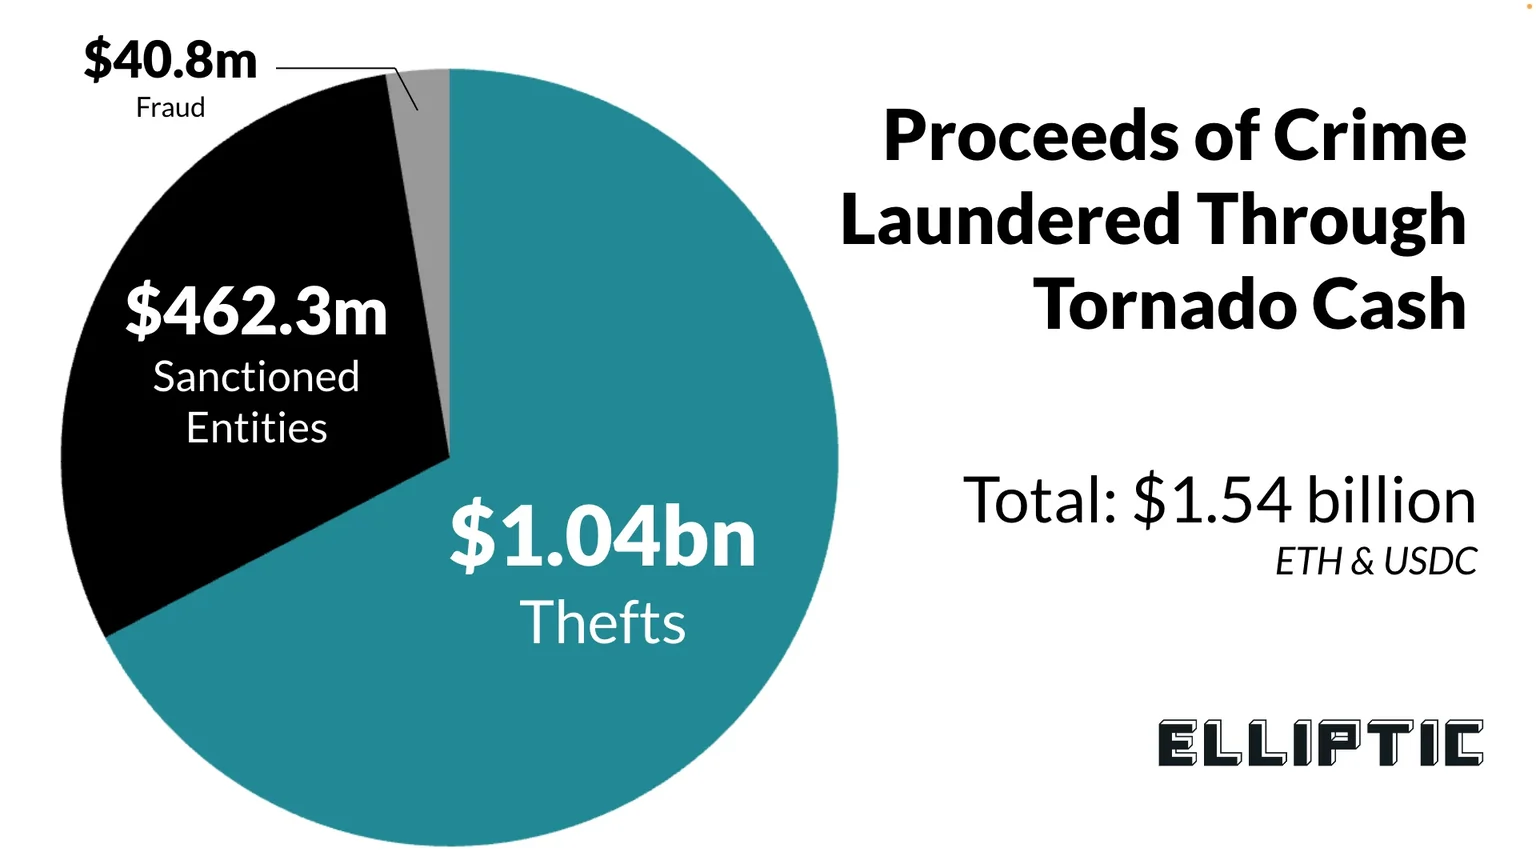 A pie chart showing the breakdown of illicit funds on Tornado Cash.